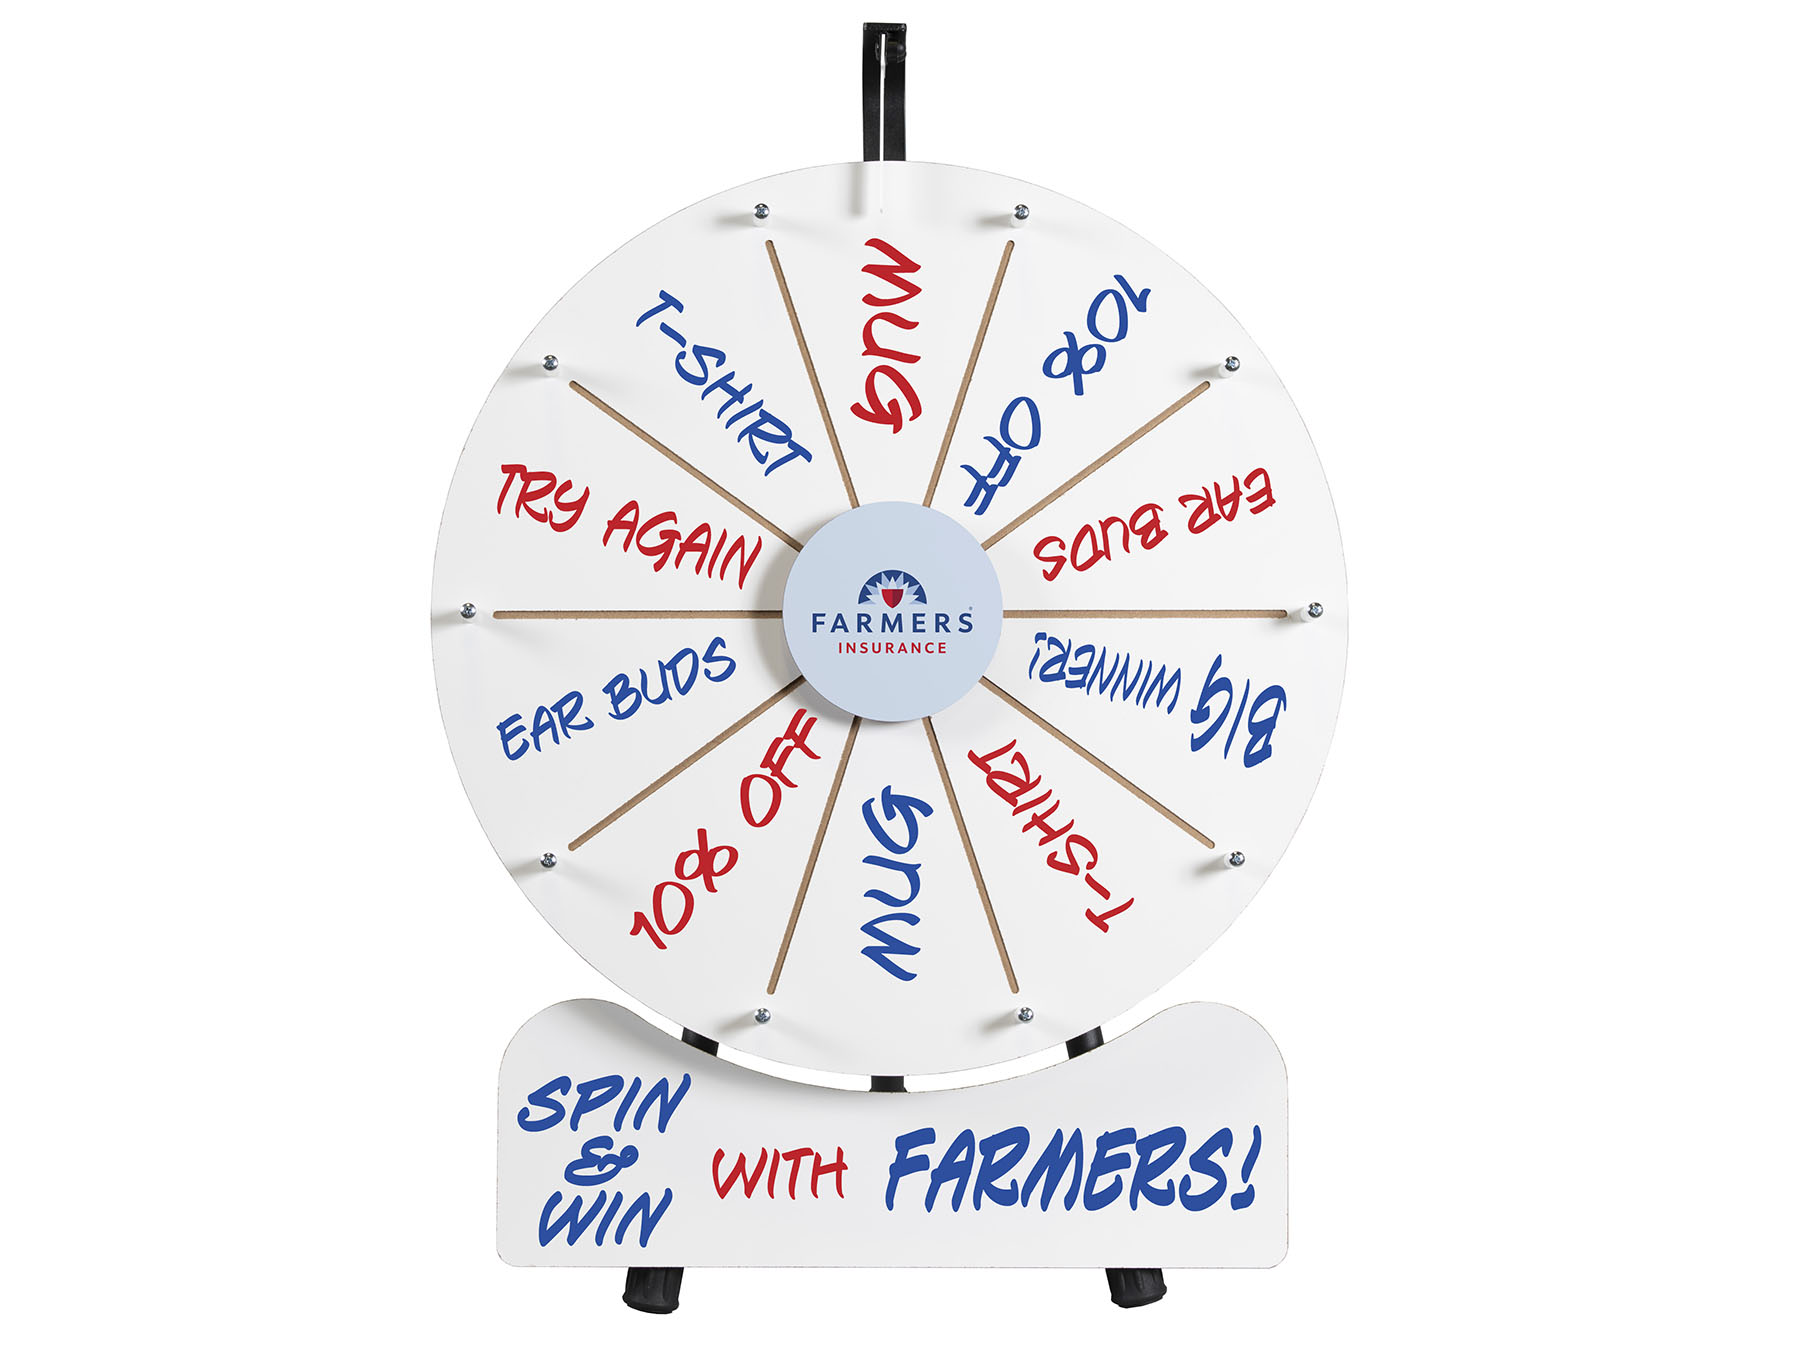 Adjustable Spin Speed Customizable Dry Erase Button Tabletop Prize Wheels for Trade Shows Office Games Brybelly Spin it to Win It Prize Wheel 14 Blank Dry Erase Slots 15 and Parties